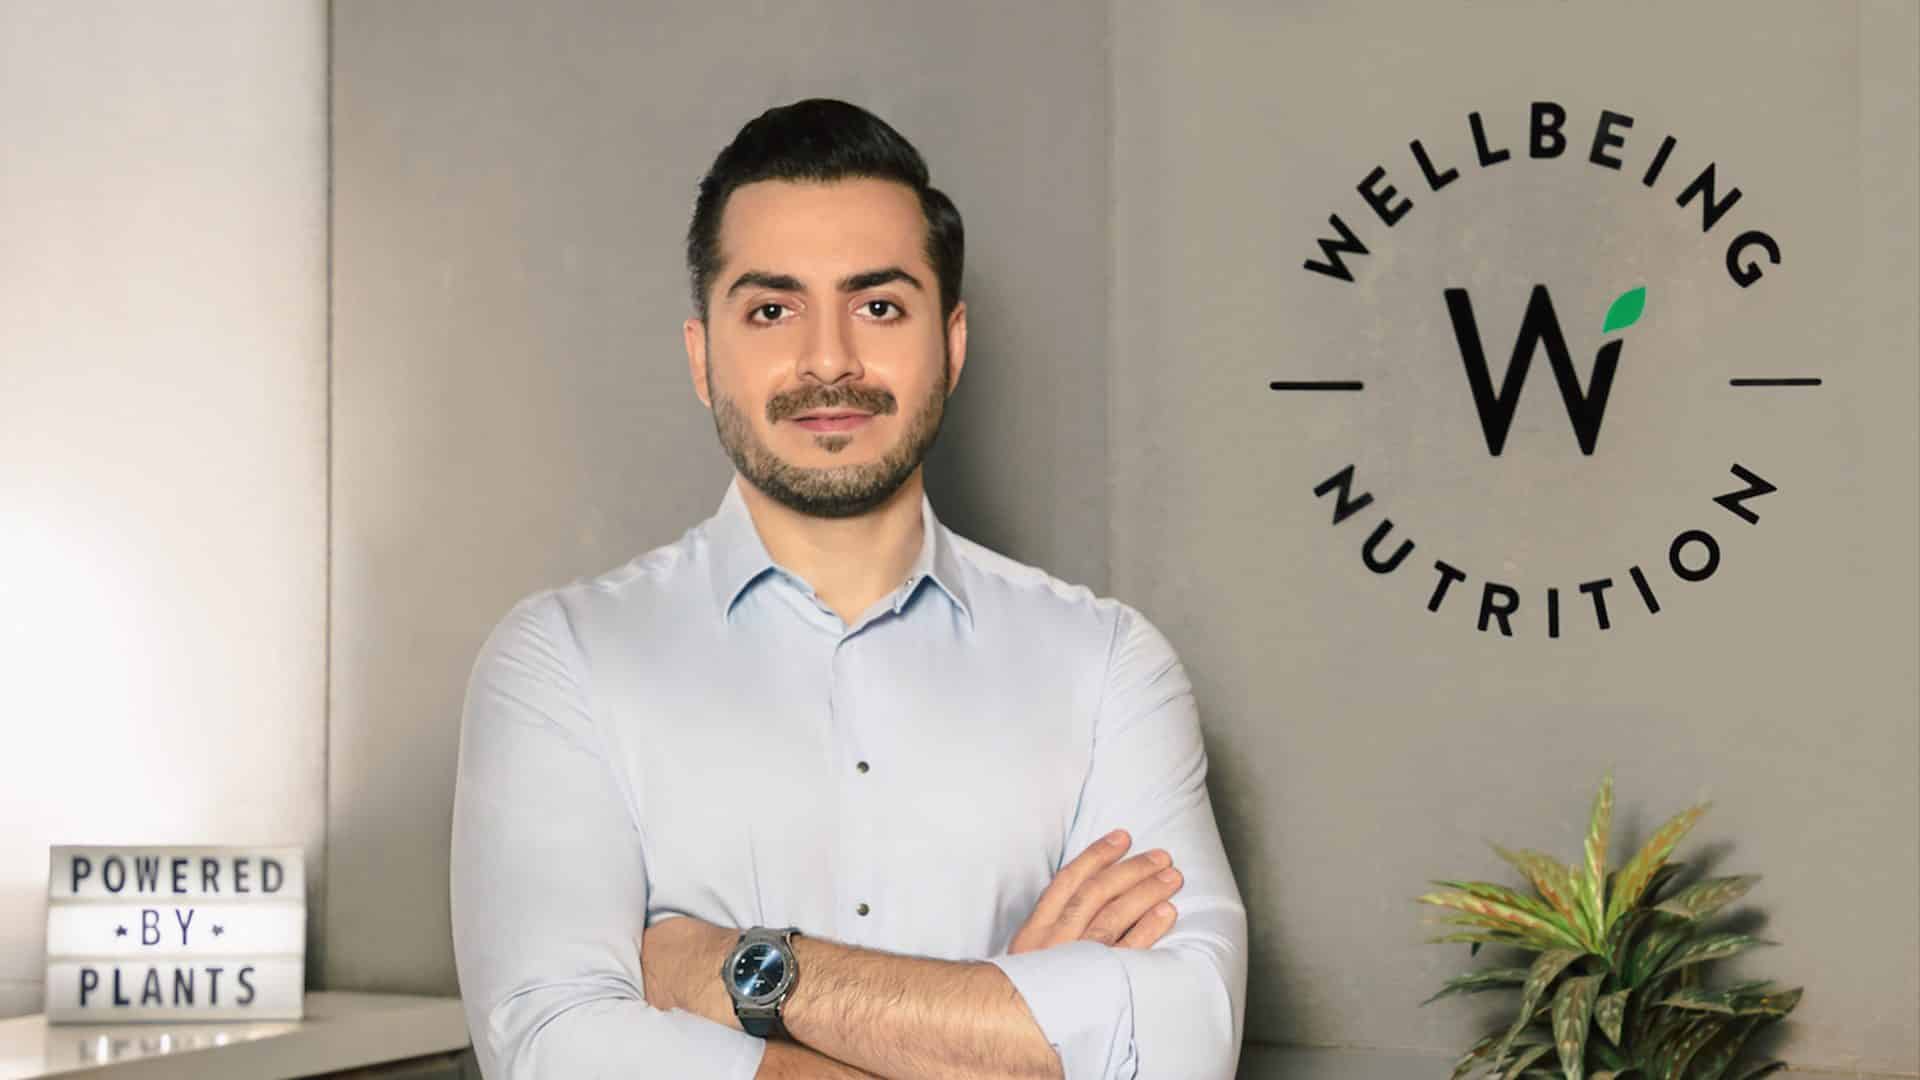 Wellbeing Nutrition raises USD 2.2 million in Series A led by Fireside Ventures